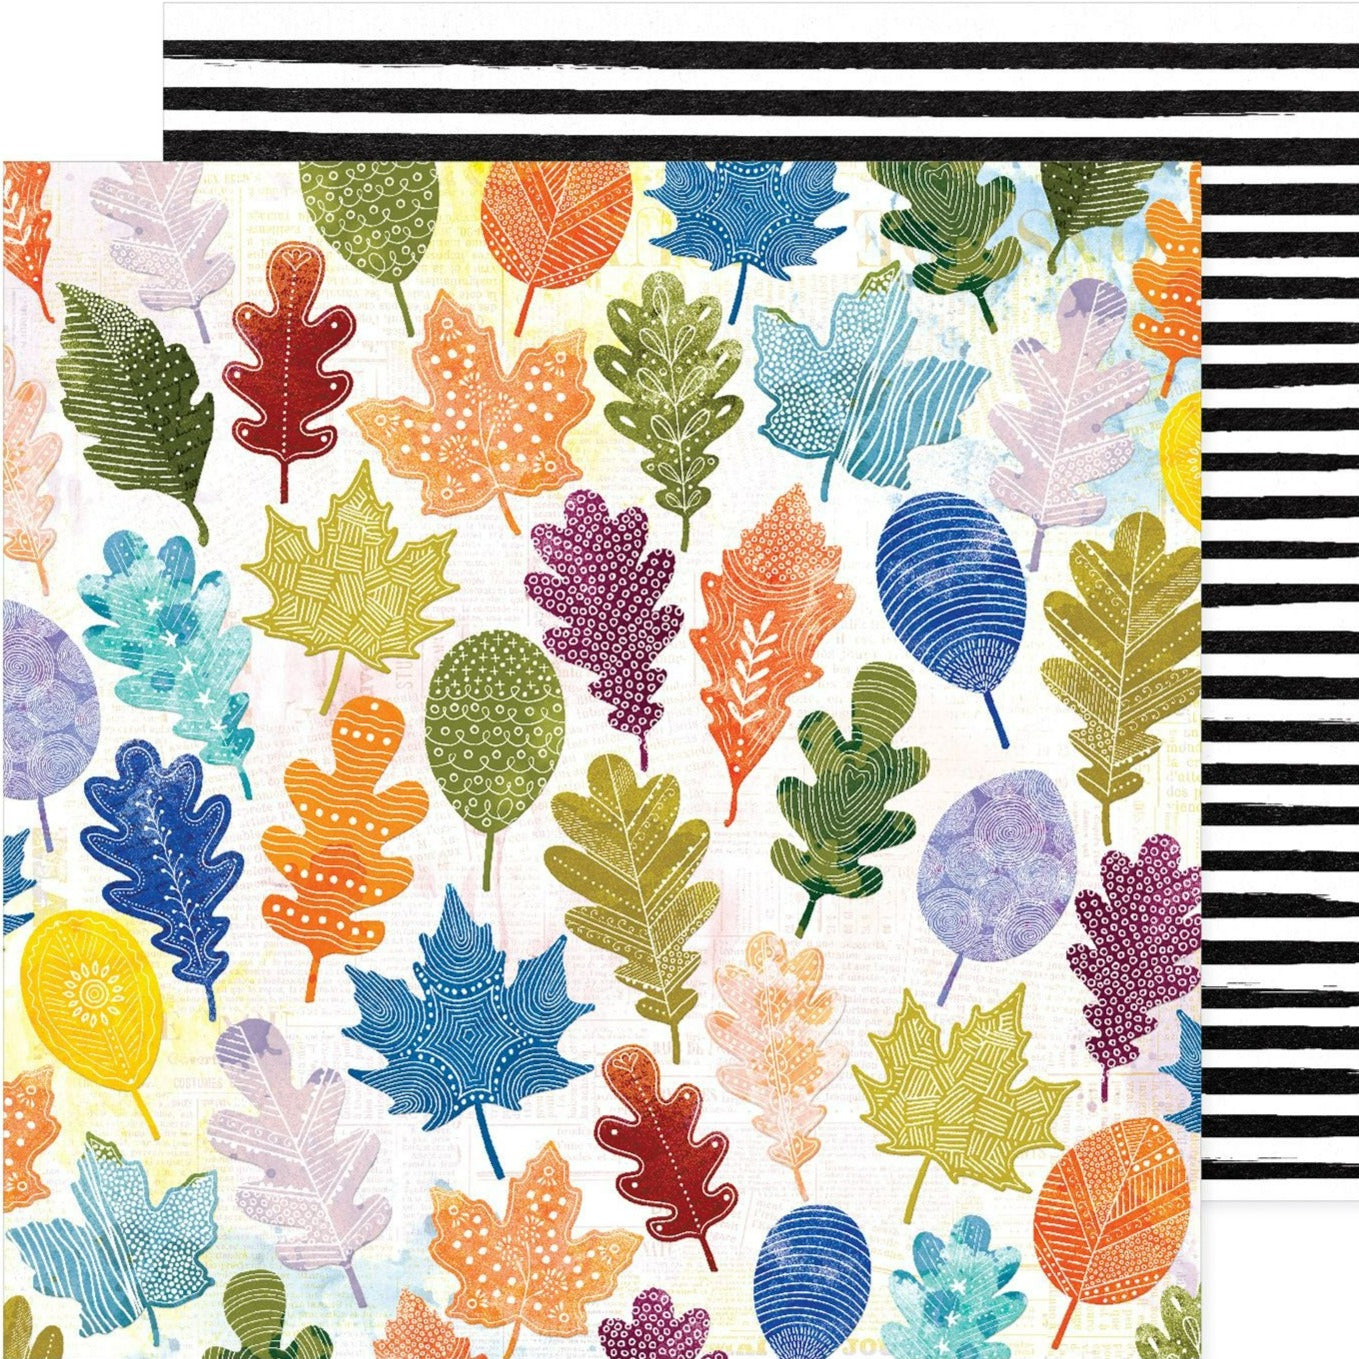 12x12 patterned cardstock. (Side A - beautiful fall leaves in multiple on a white background, Side B - black and white stripes) - Archival-safe and acid-free from American Crafts